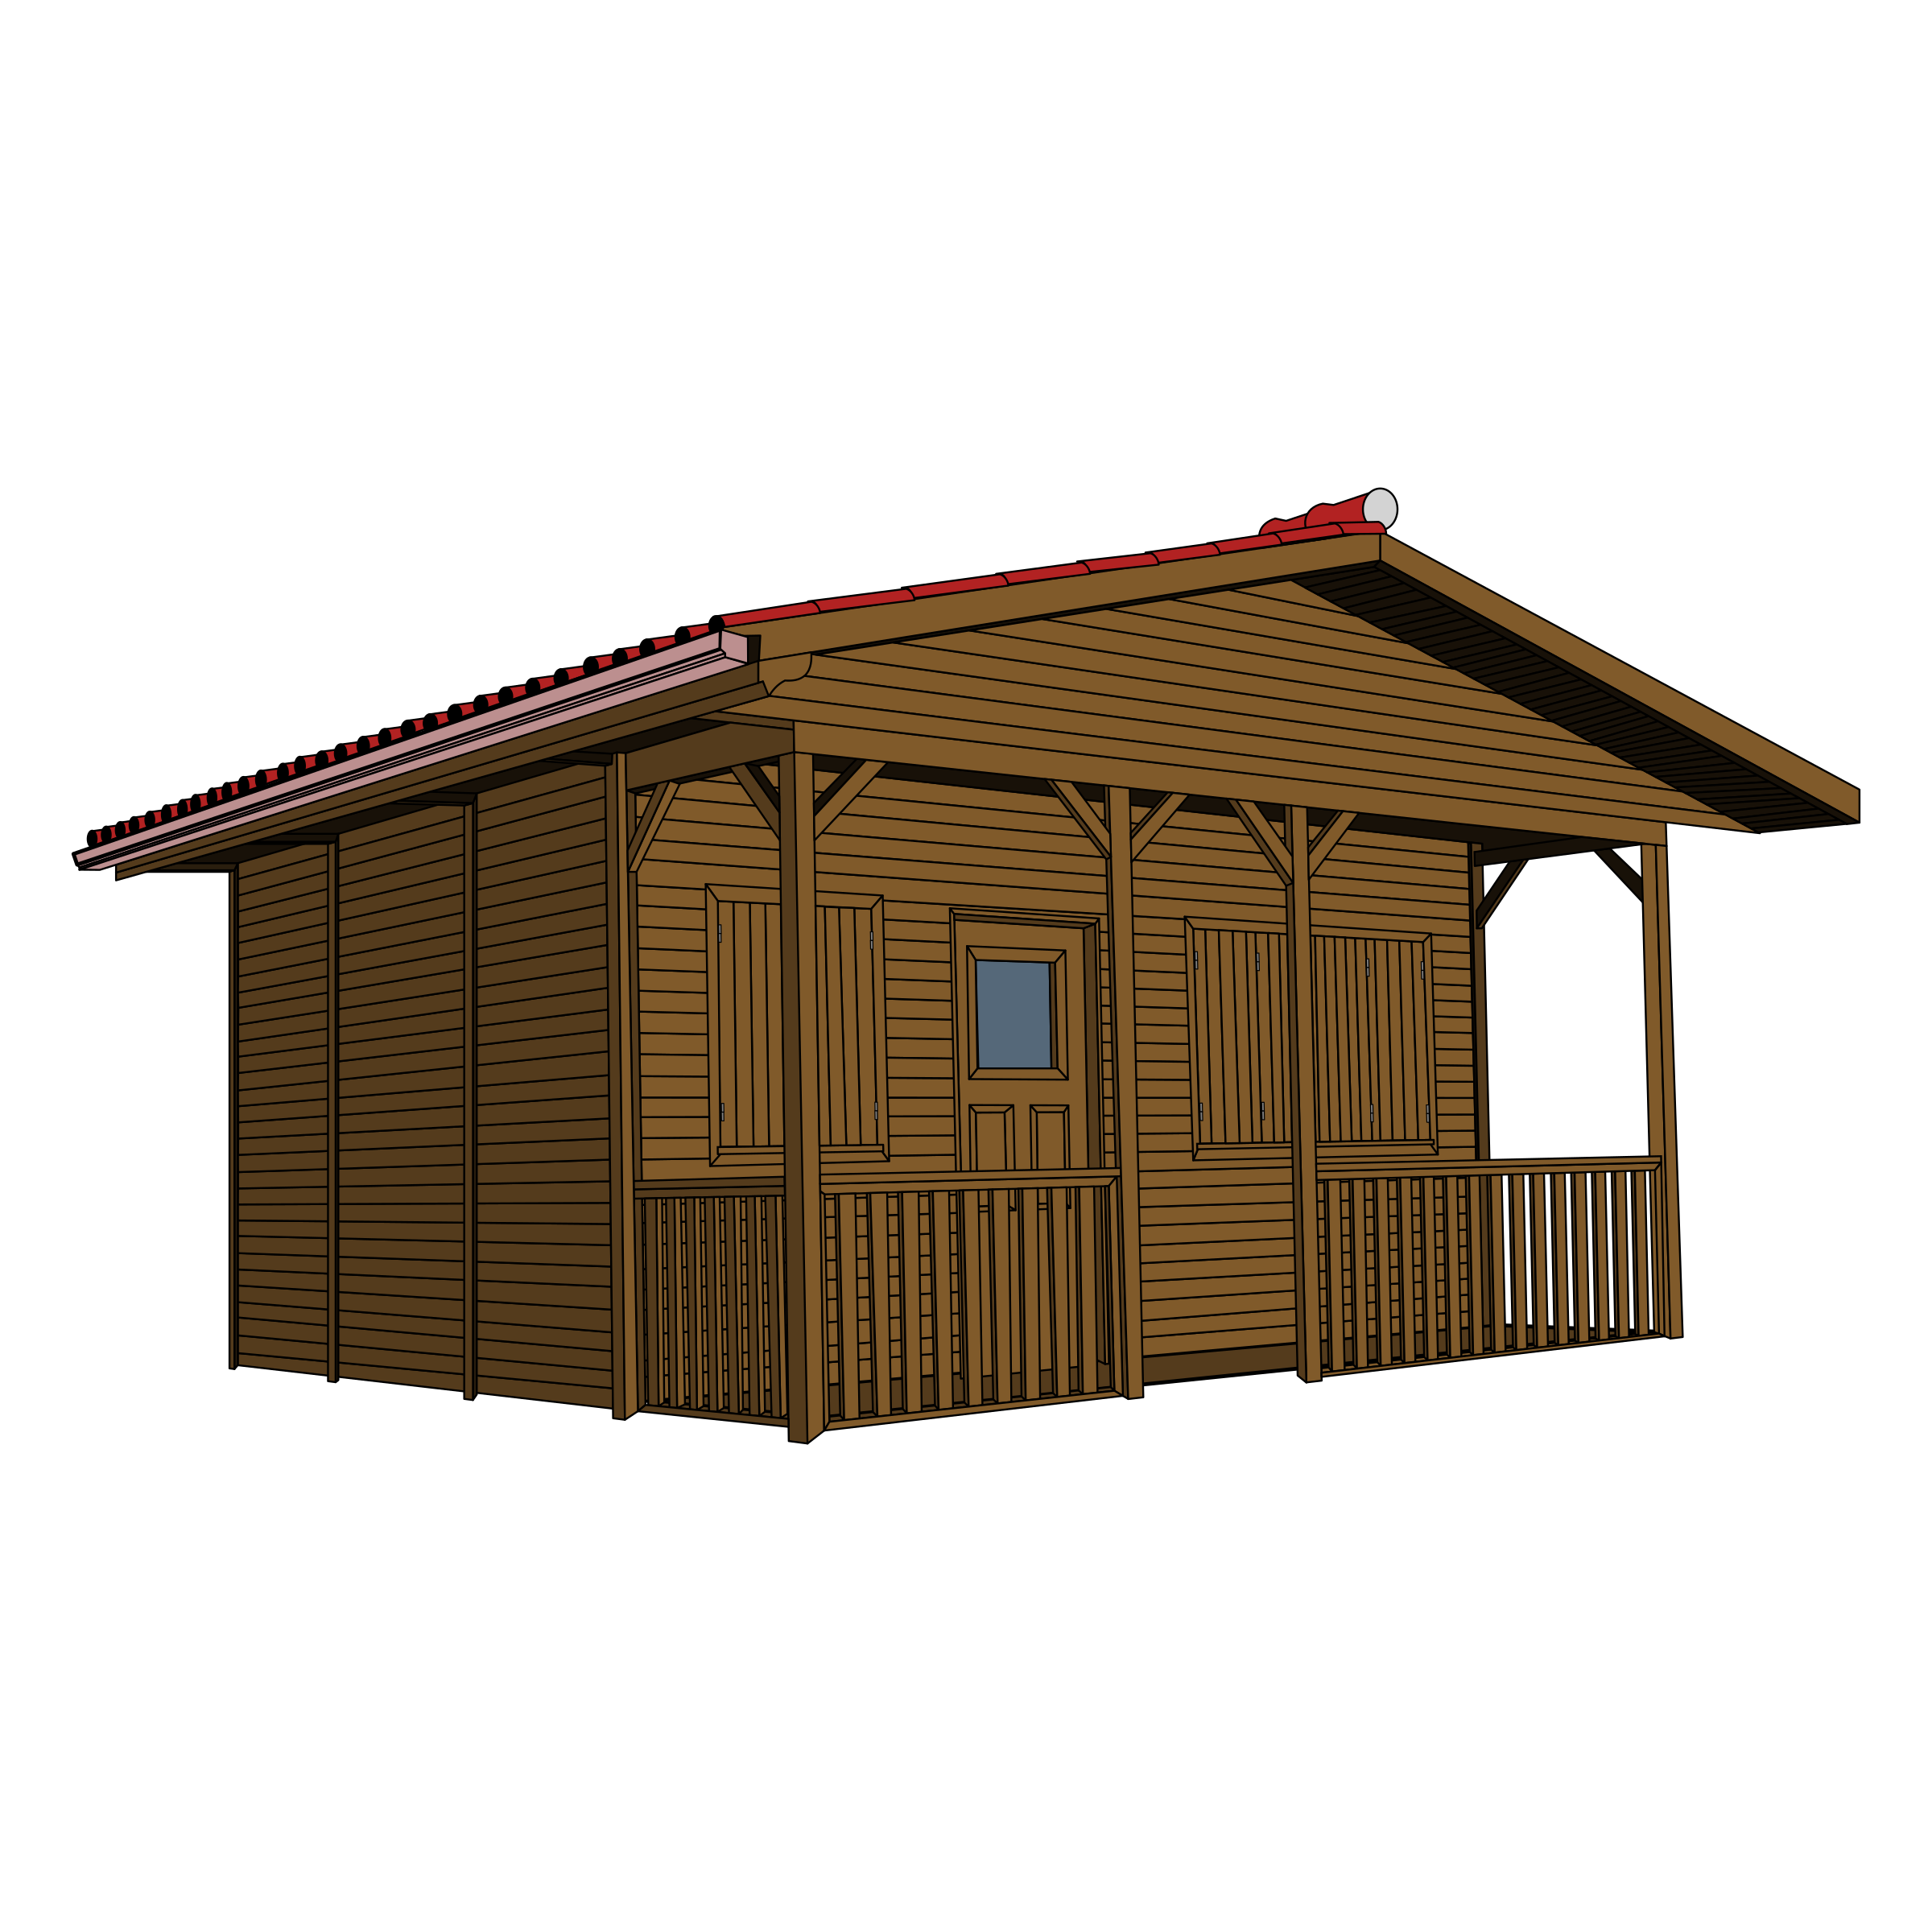 Big wooden house clipart 